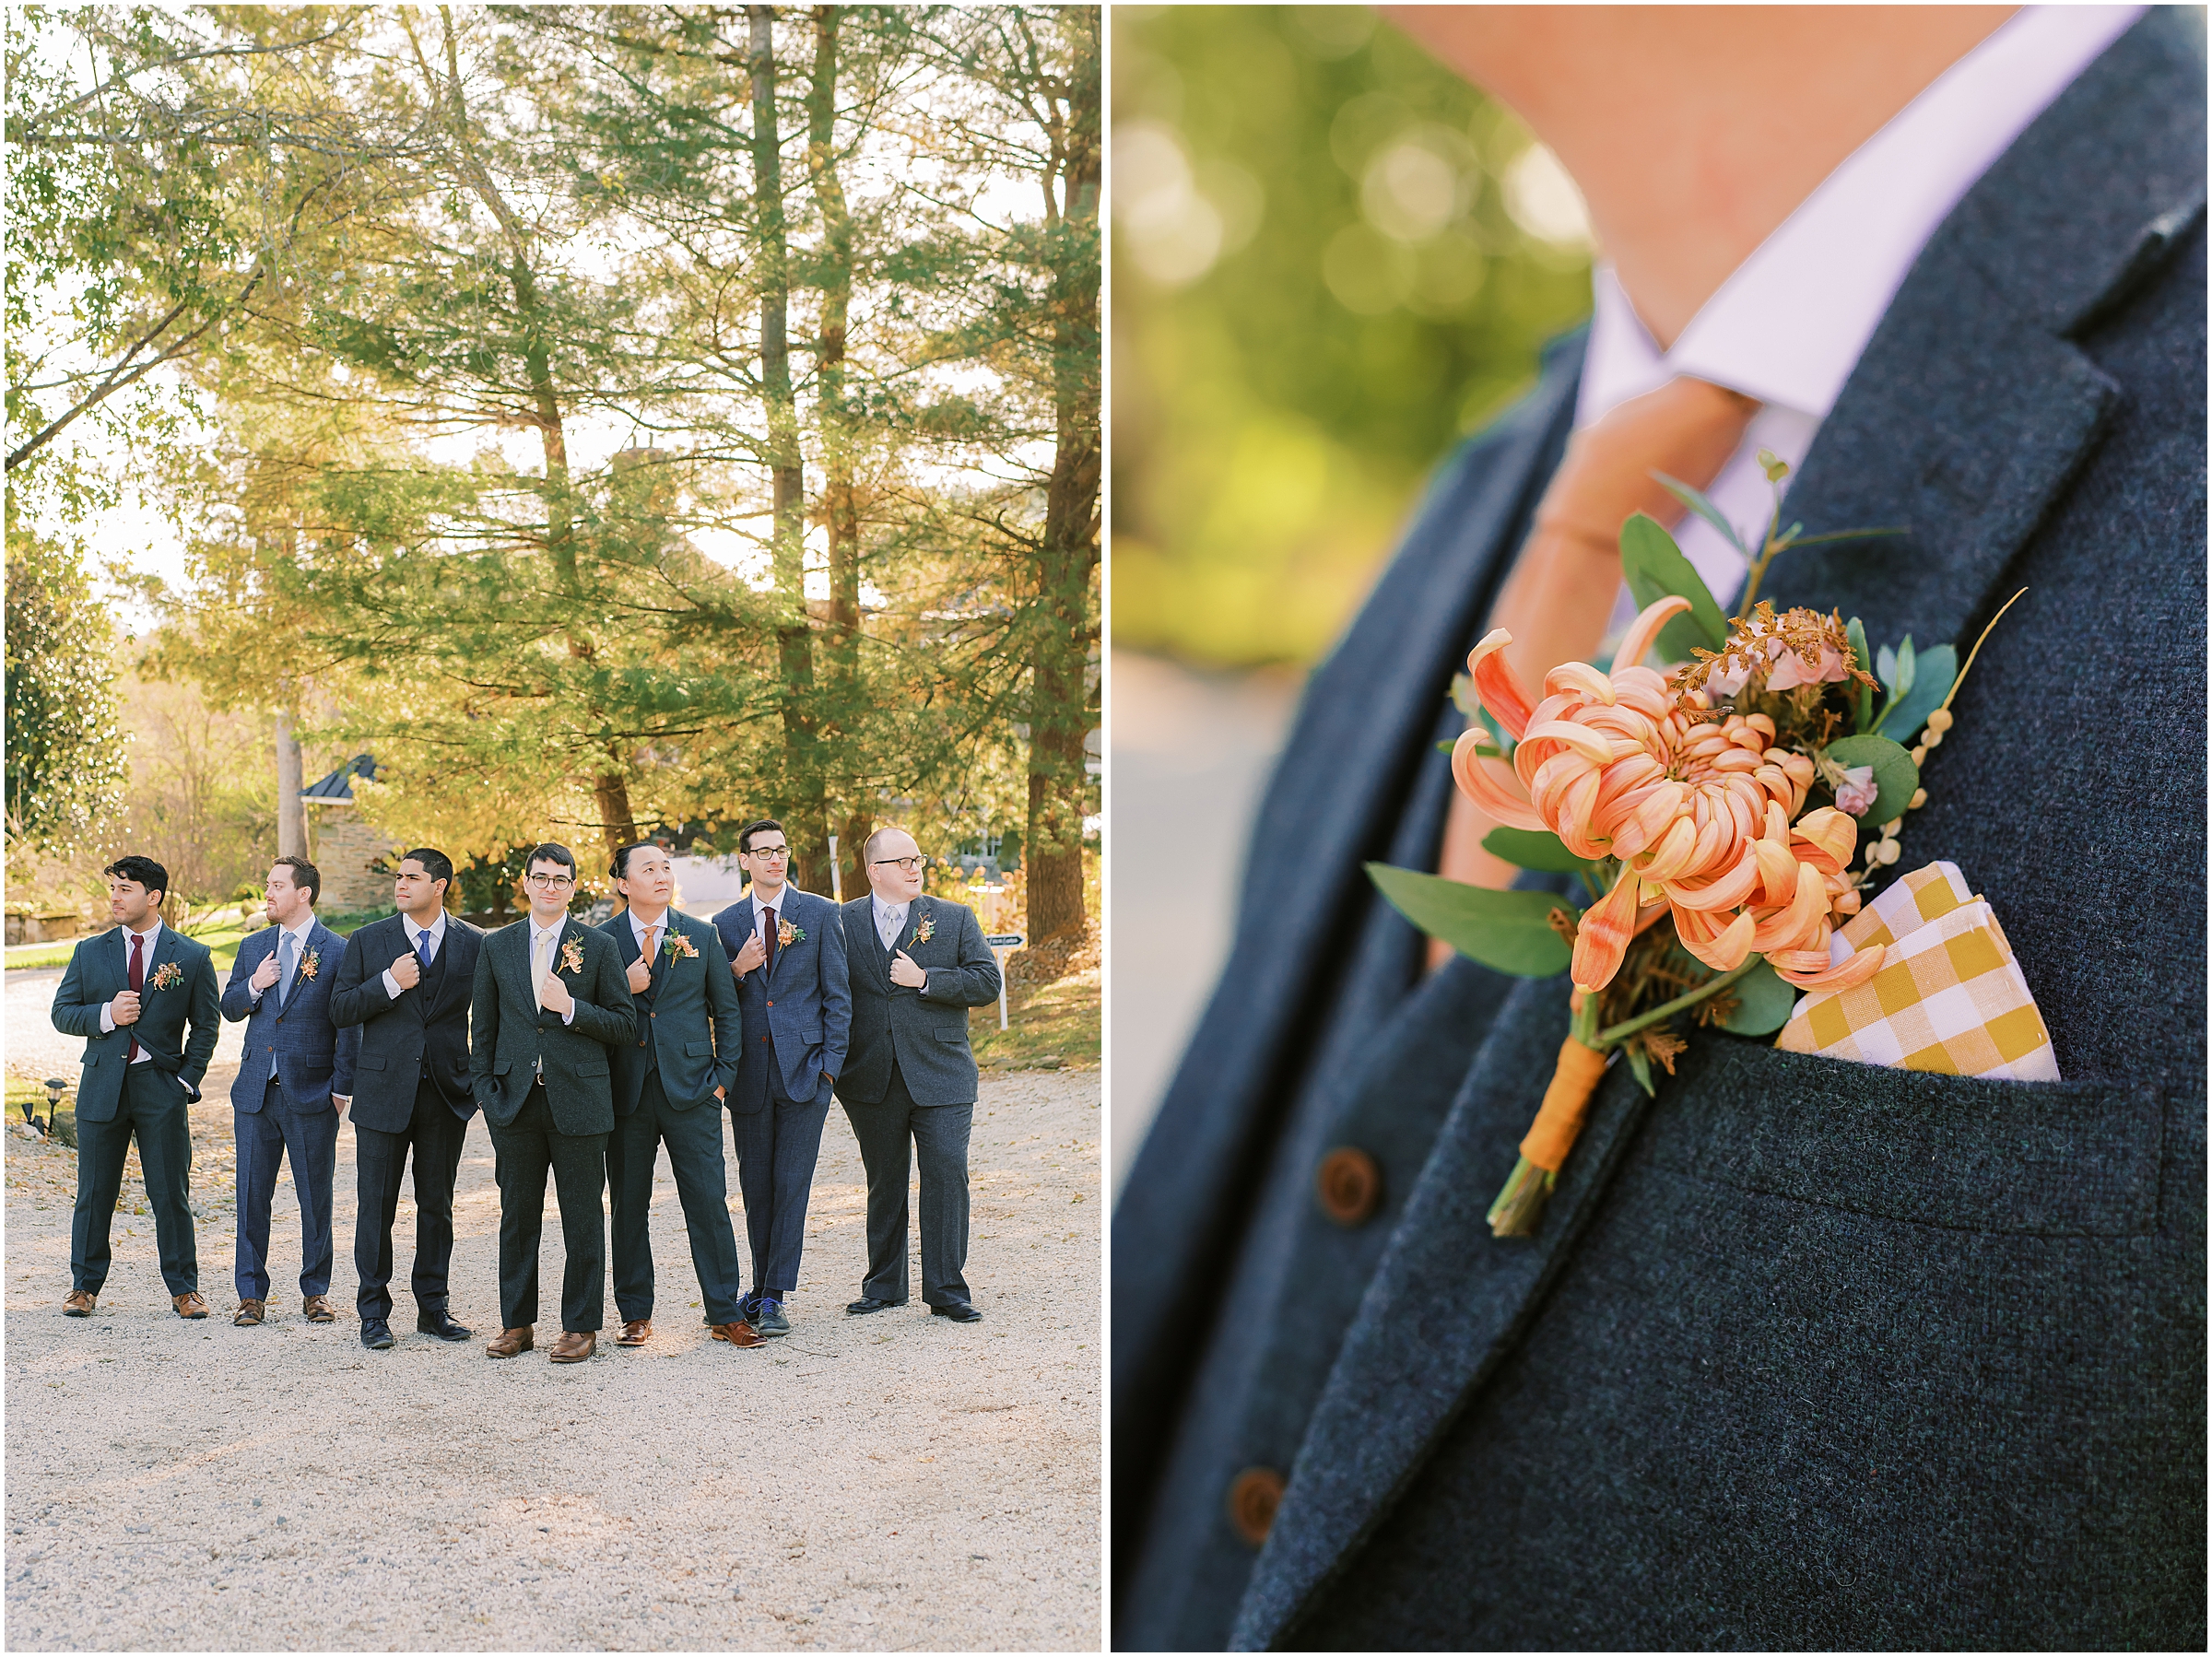 Groom and wedding party in blue suits at winter market themed wedding at Tranquility Farm